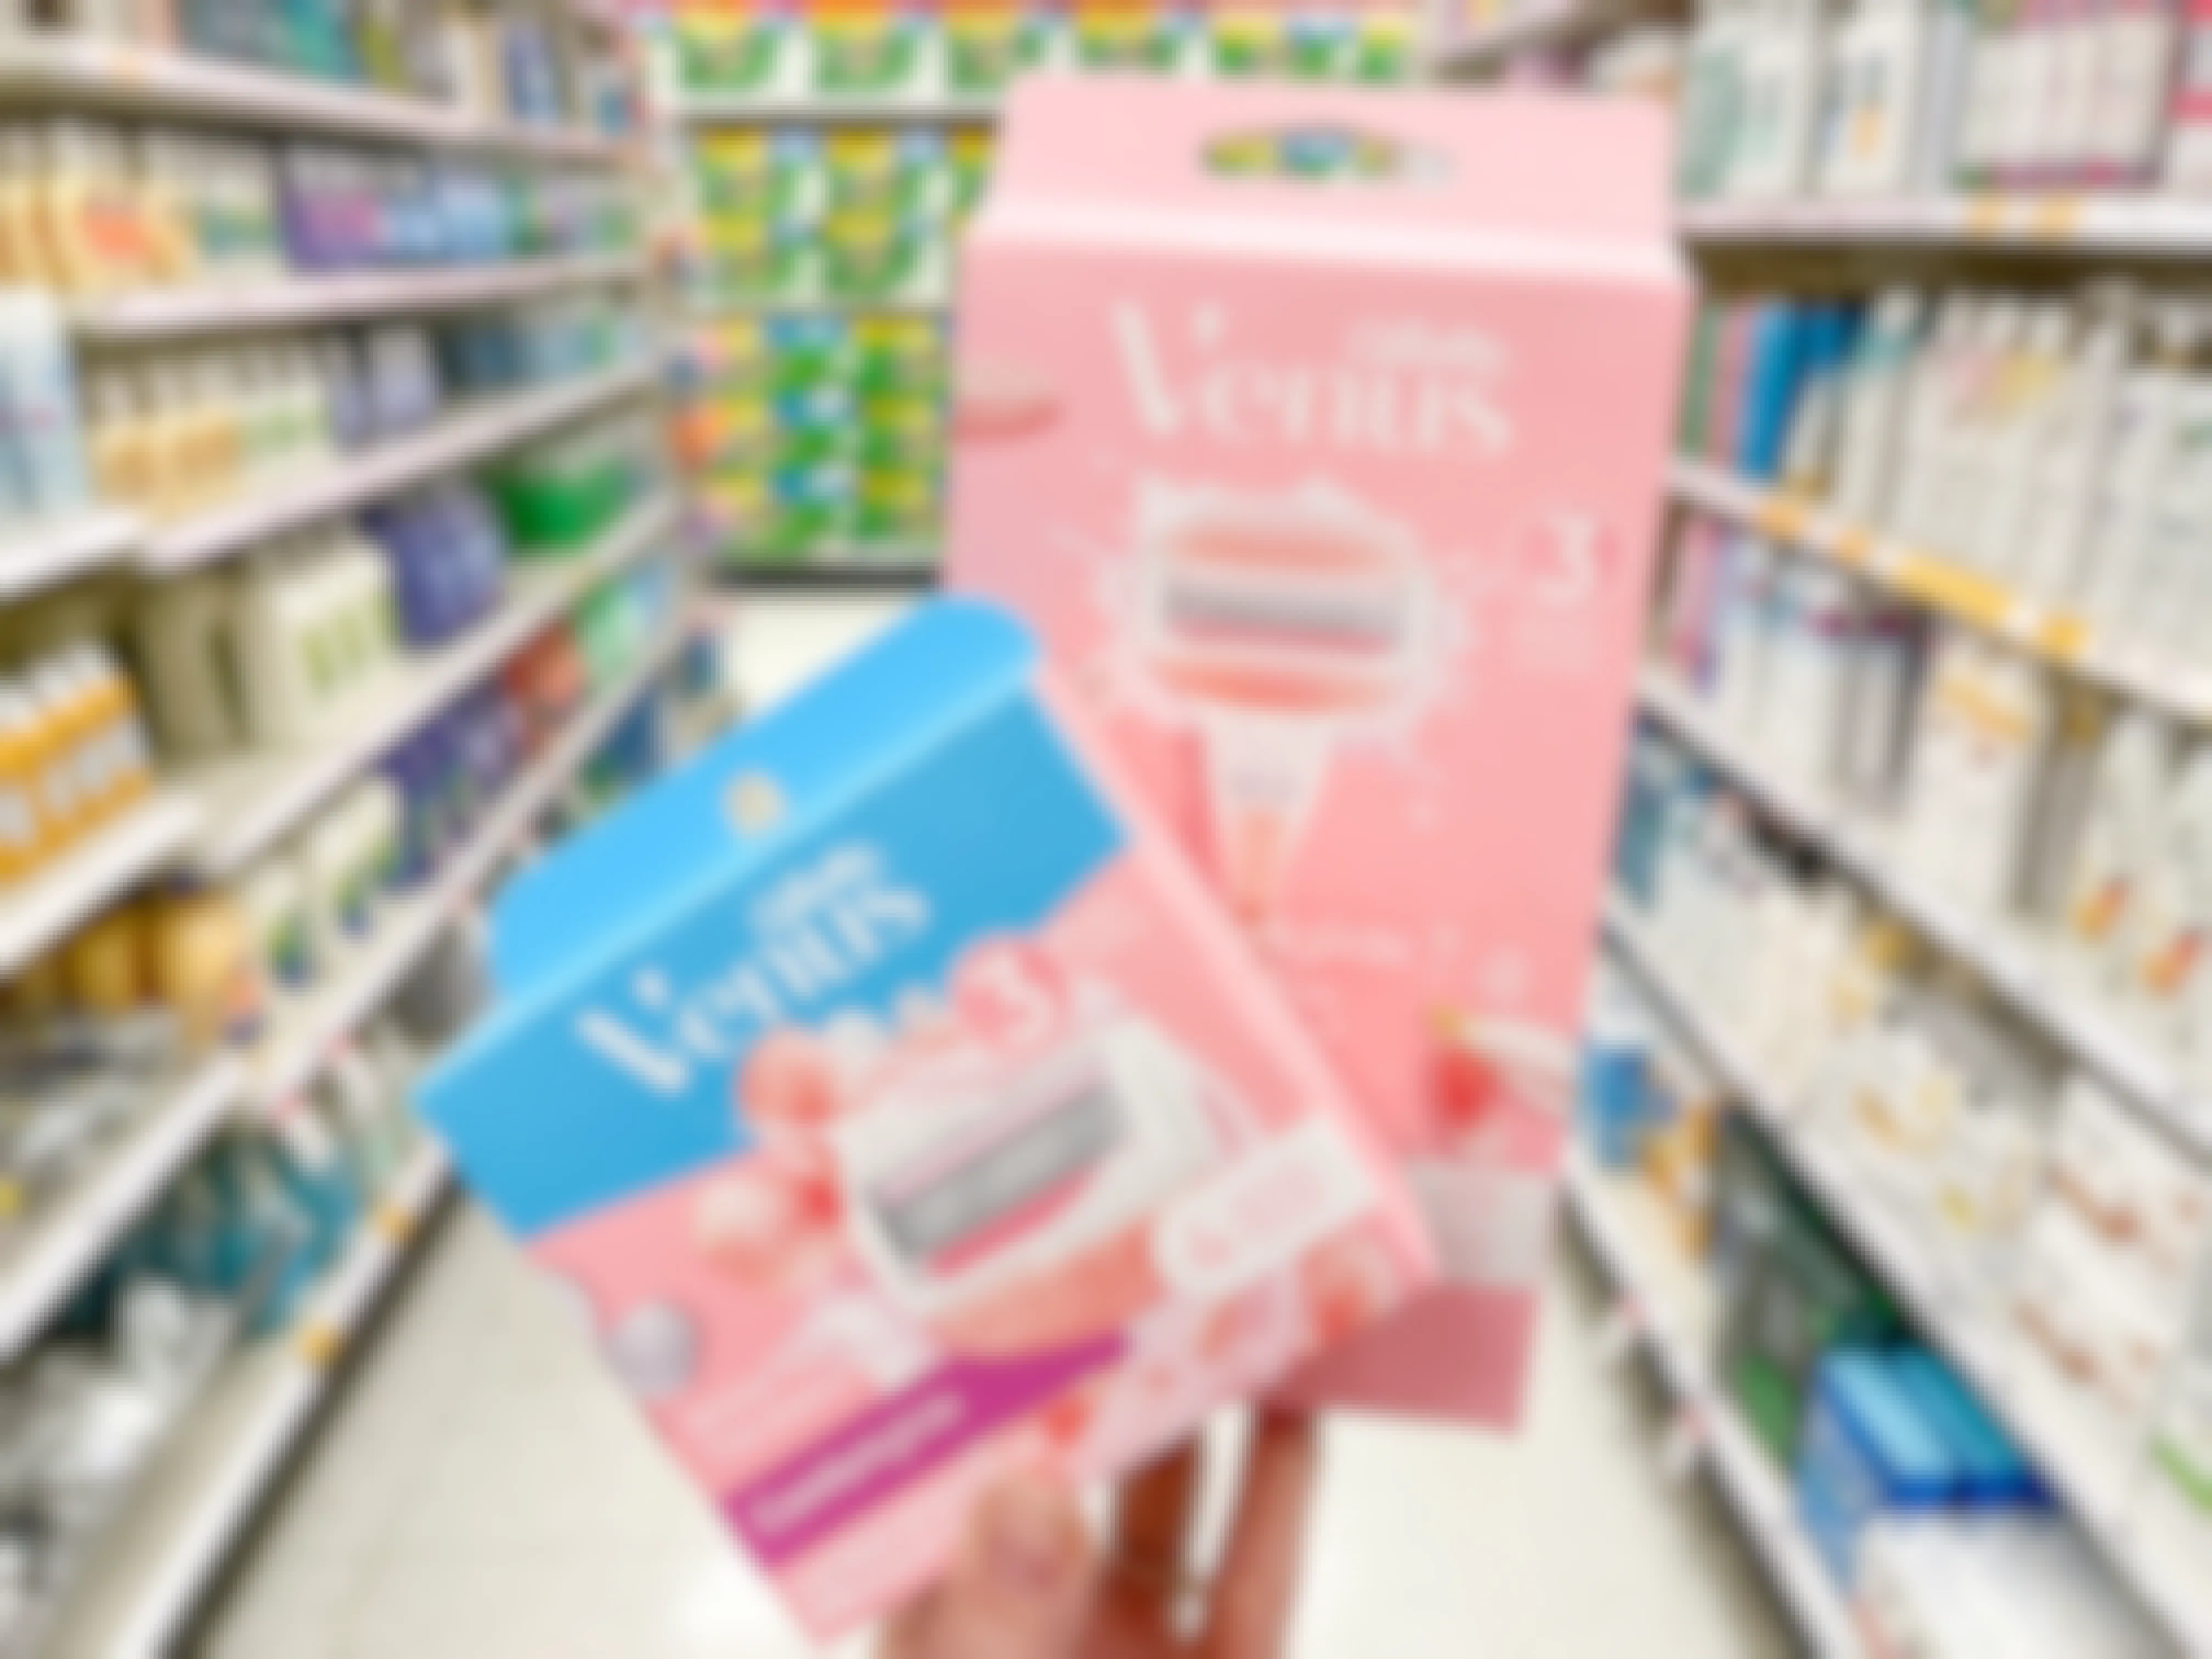 A Venus White Tea razor and a Venus refill pack held out by hand in front of a store aisle.